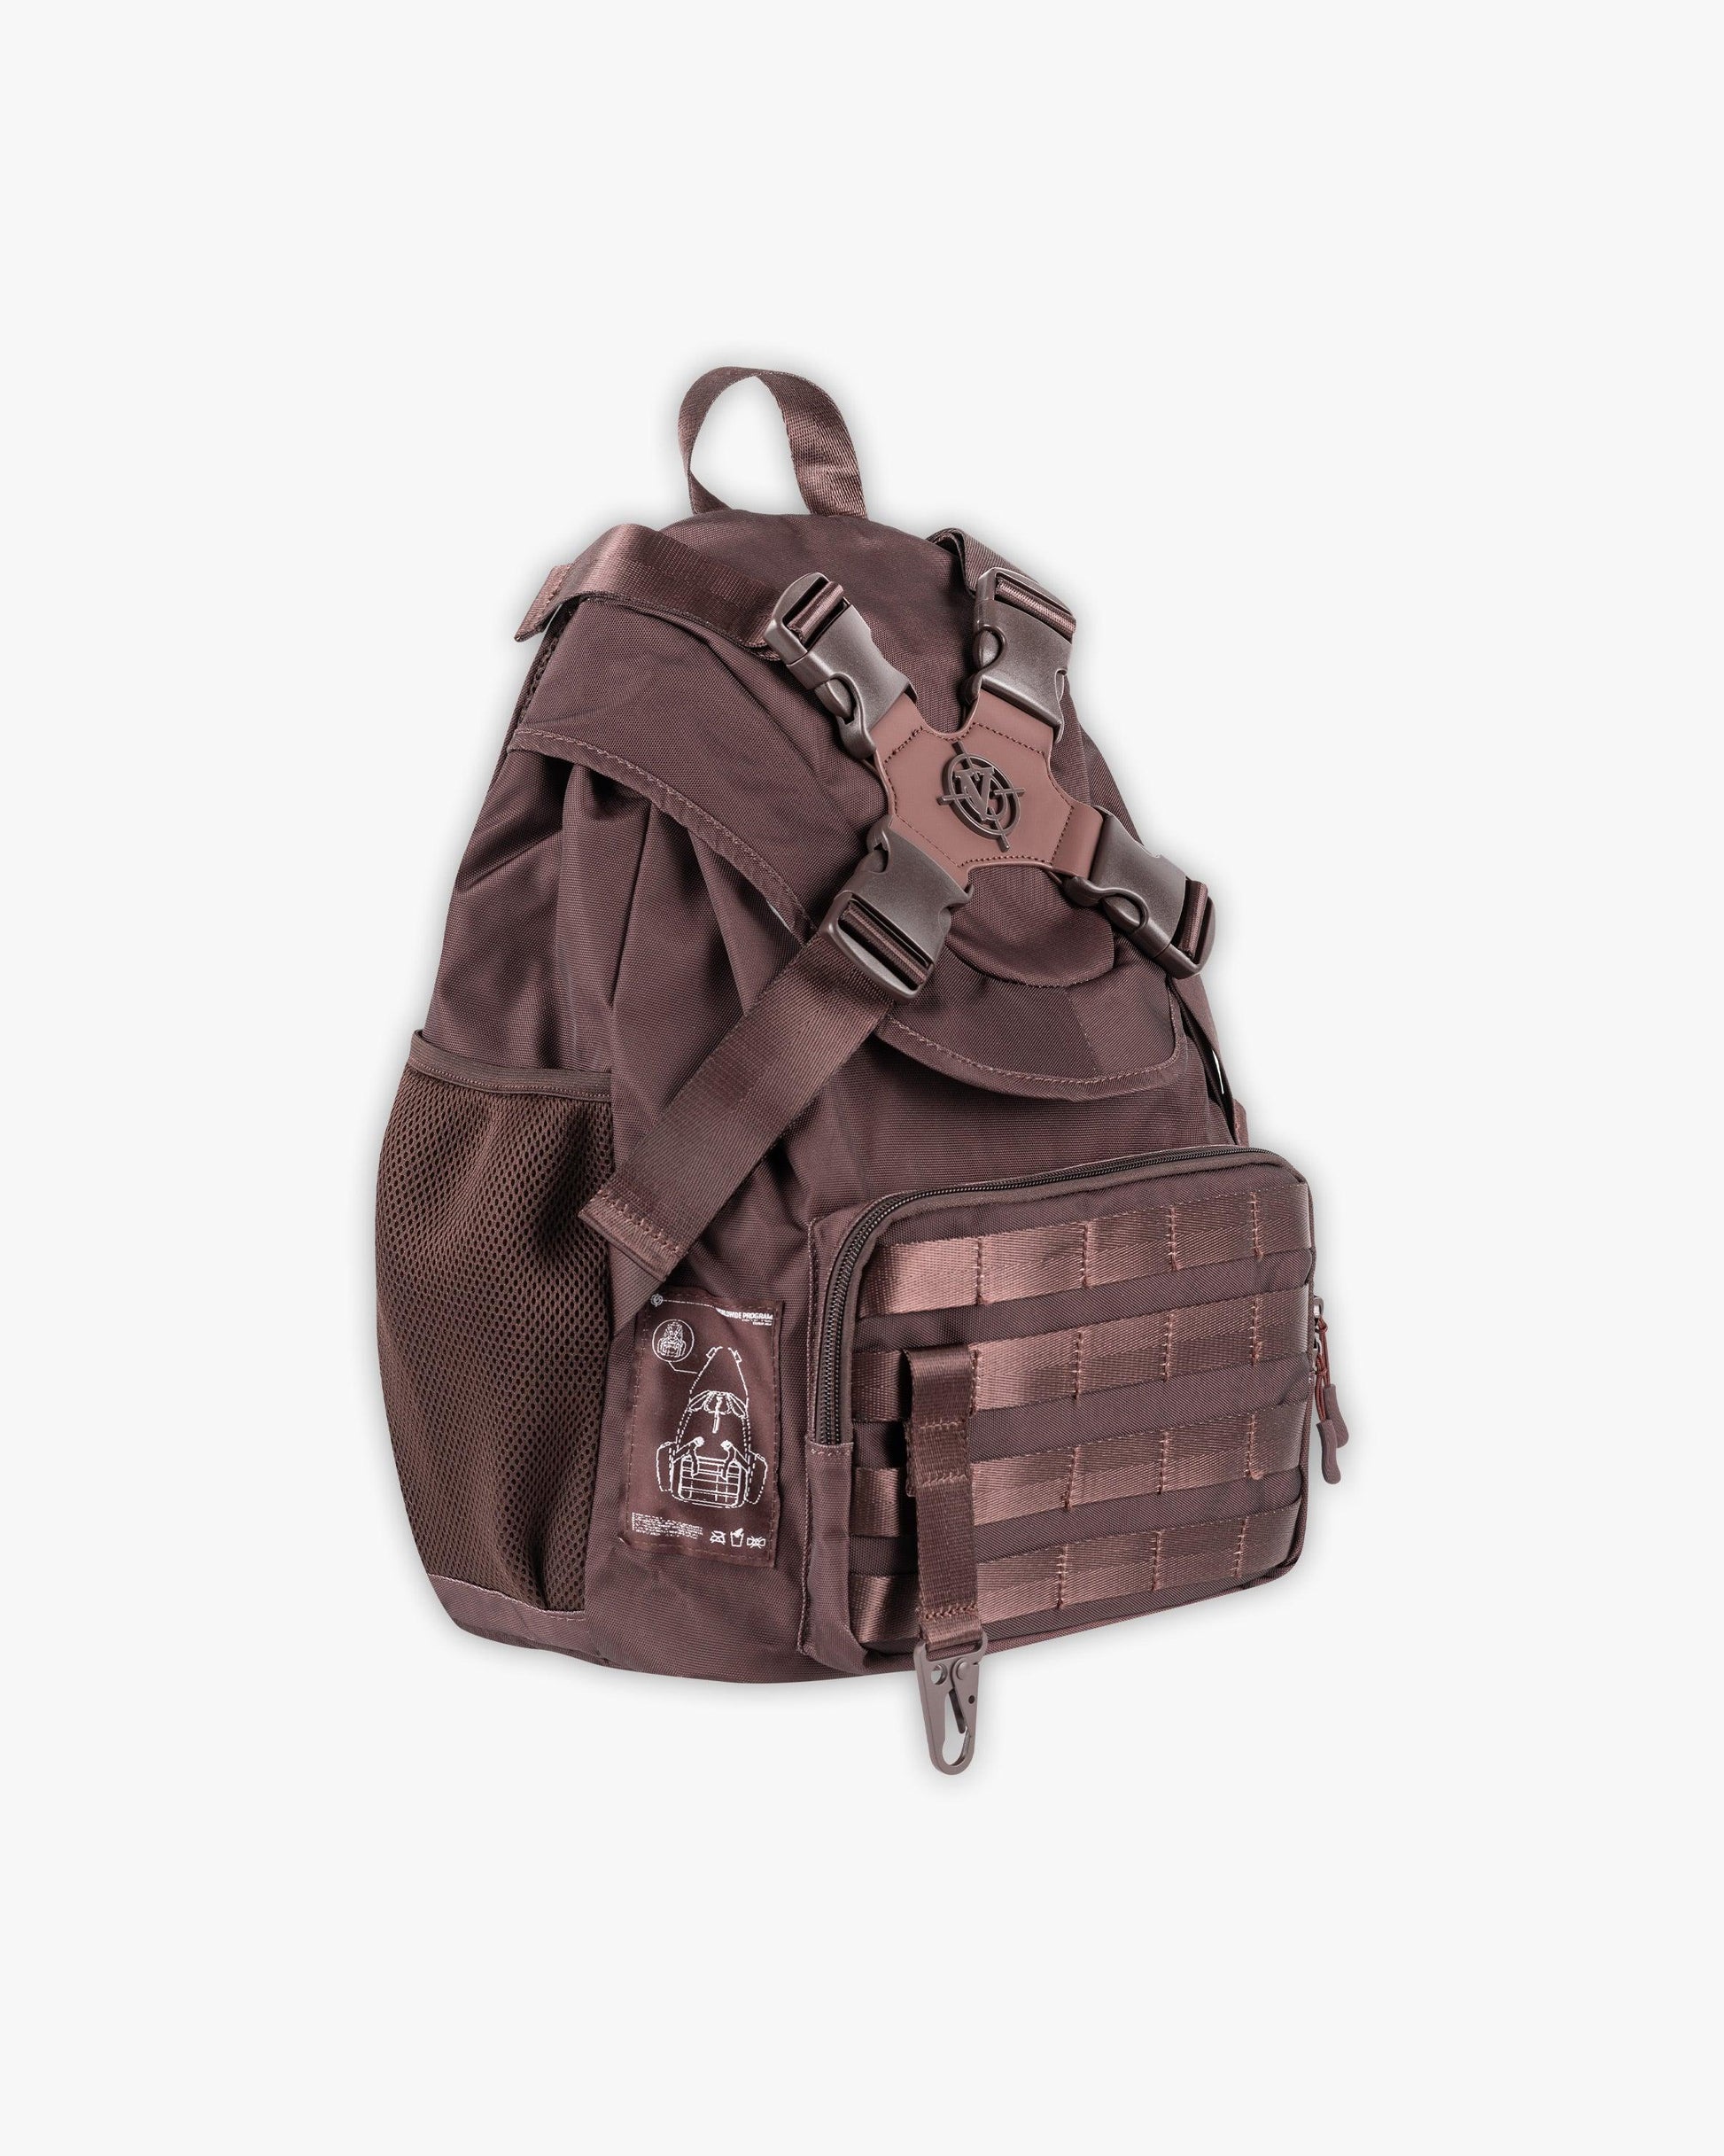 X BACKPACK BROWN - VICINITY